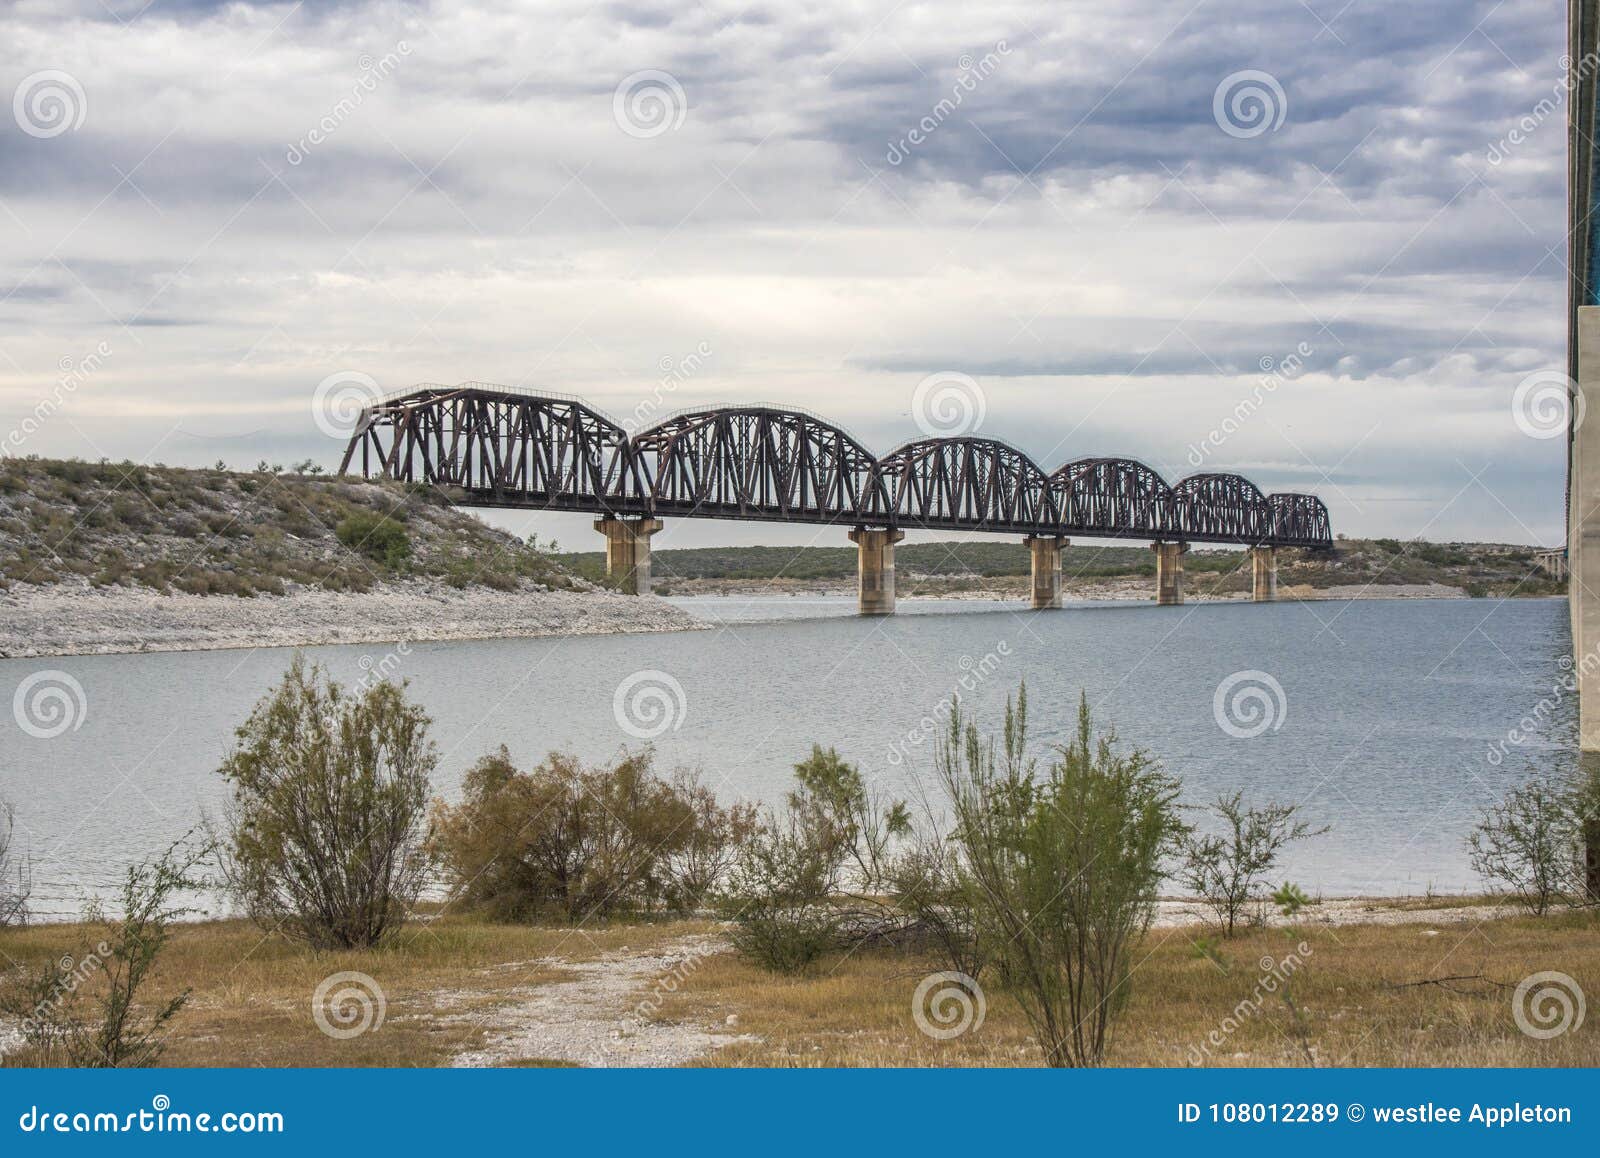 train trestle over lake amistad in val verde county texas